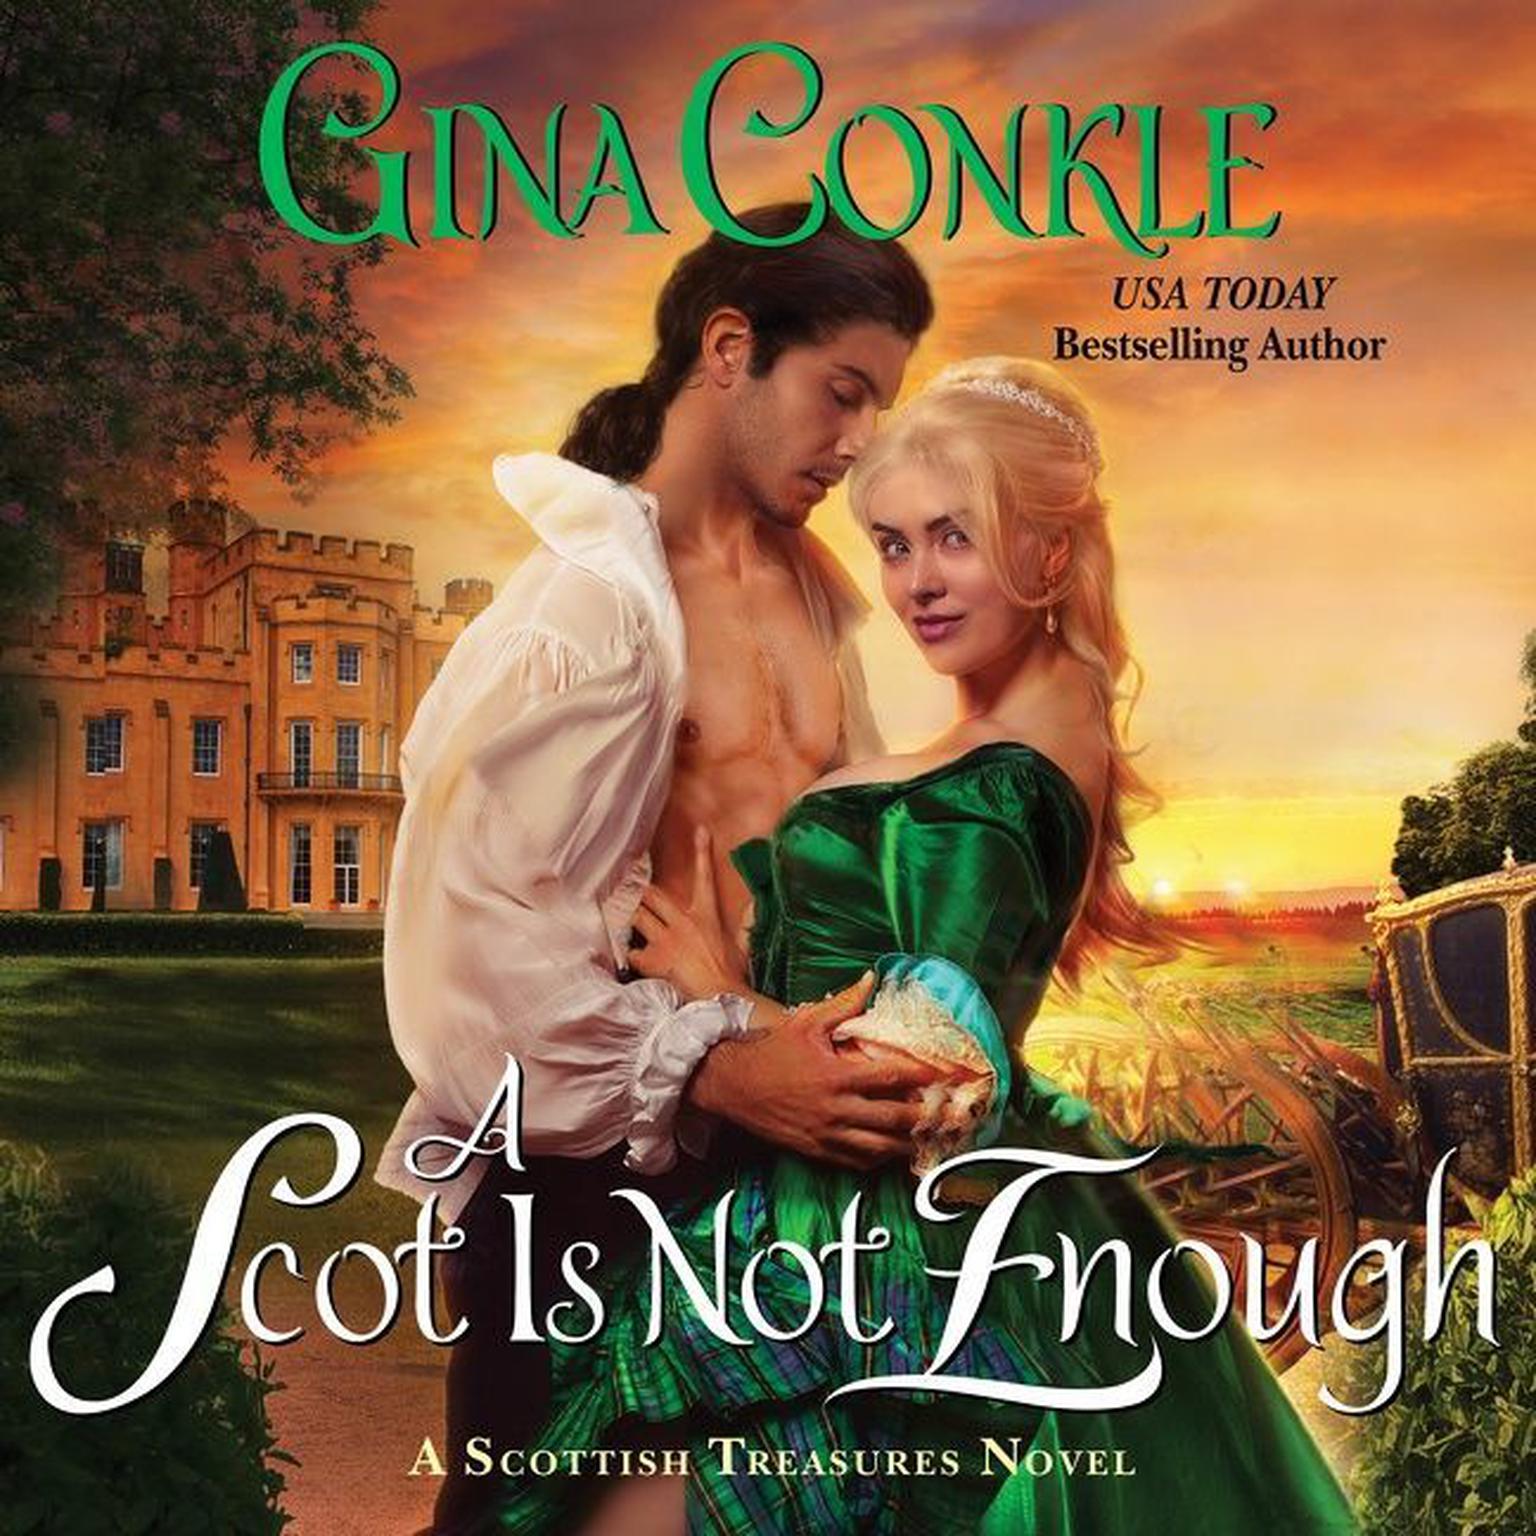 A Scot Is Not Enough: A Scottish Treasures Novel Audiobook, by Gina Conkle